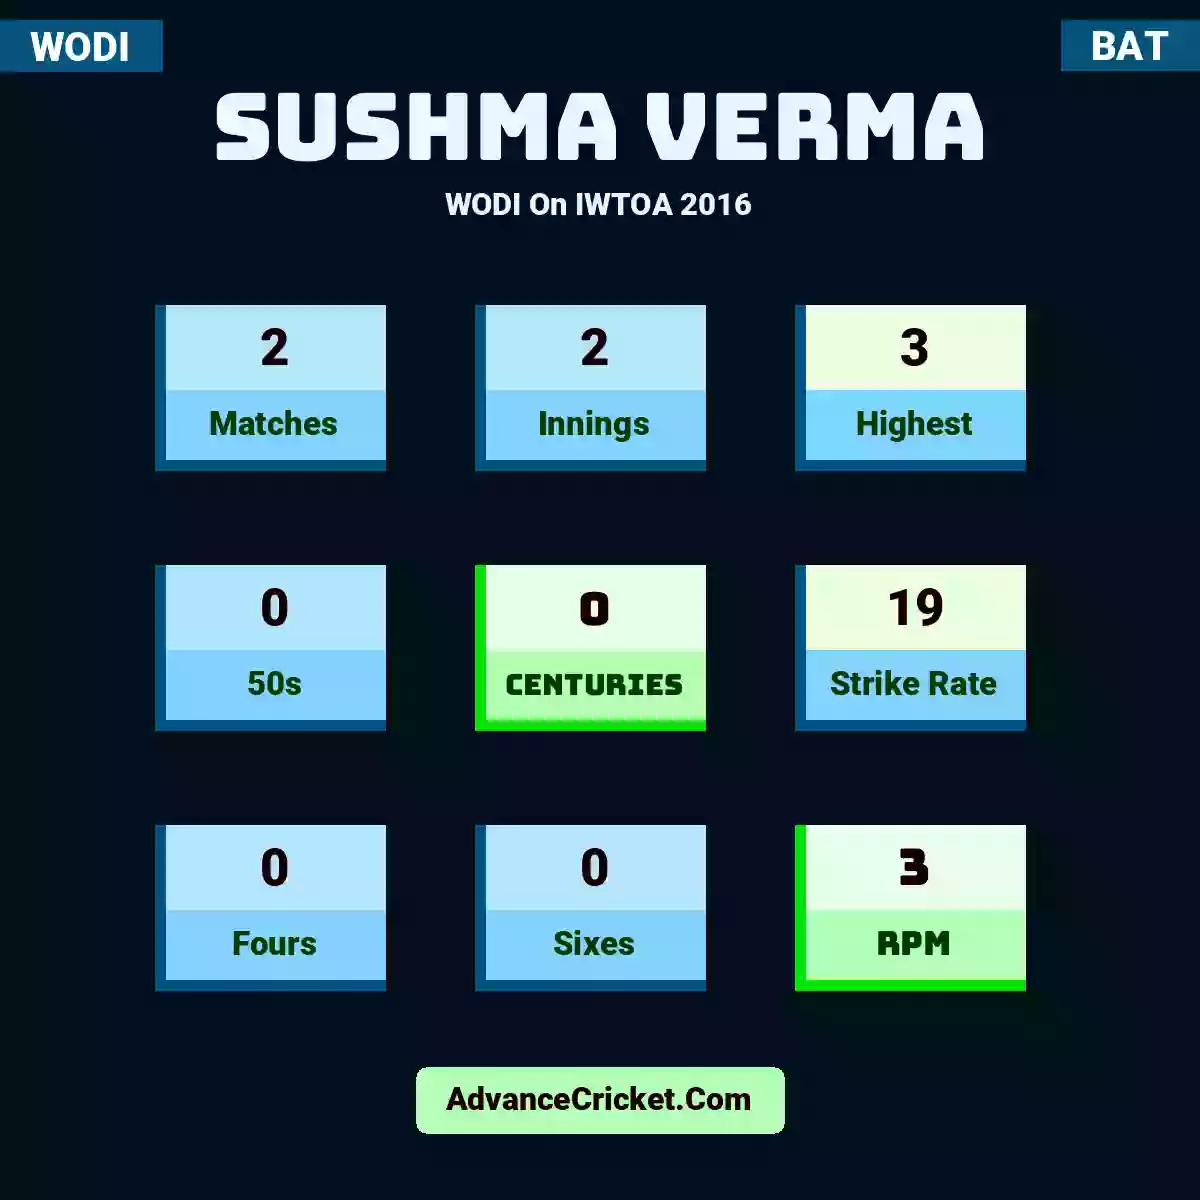 Sushma Verma WODI  On IWTOA 2016, Sushma Verma played 2 matches, scored 3 runs as highest, 0 half-centuries, and 0 centuries, with a strike rate of 19. S.Verma hit 0 fours and 0 sixes, with an RPM of 3.